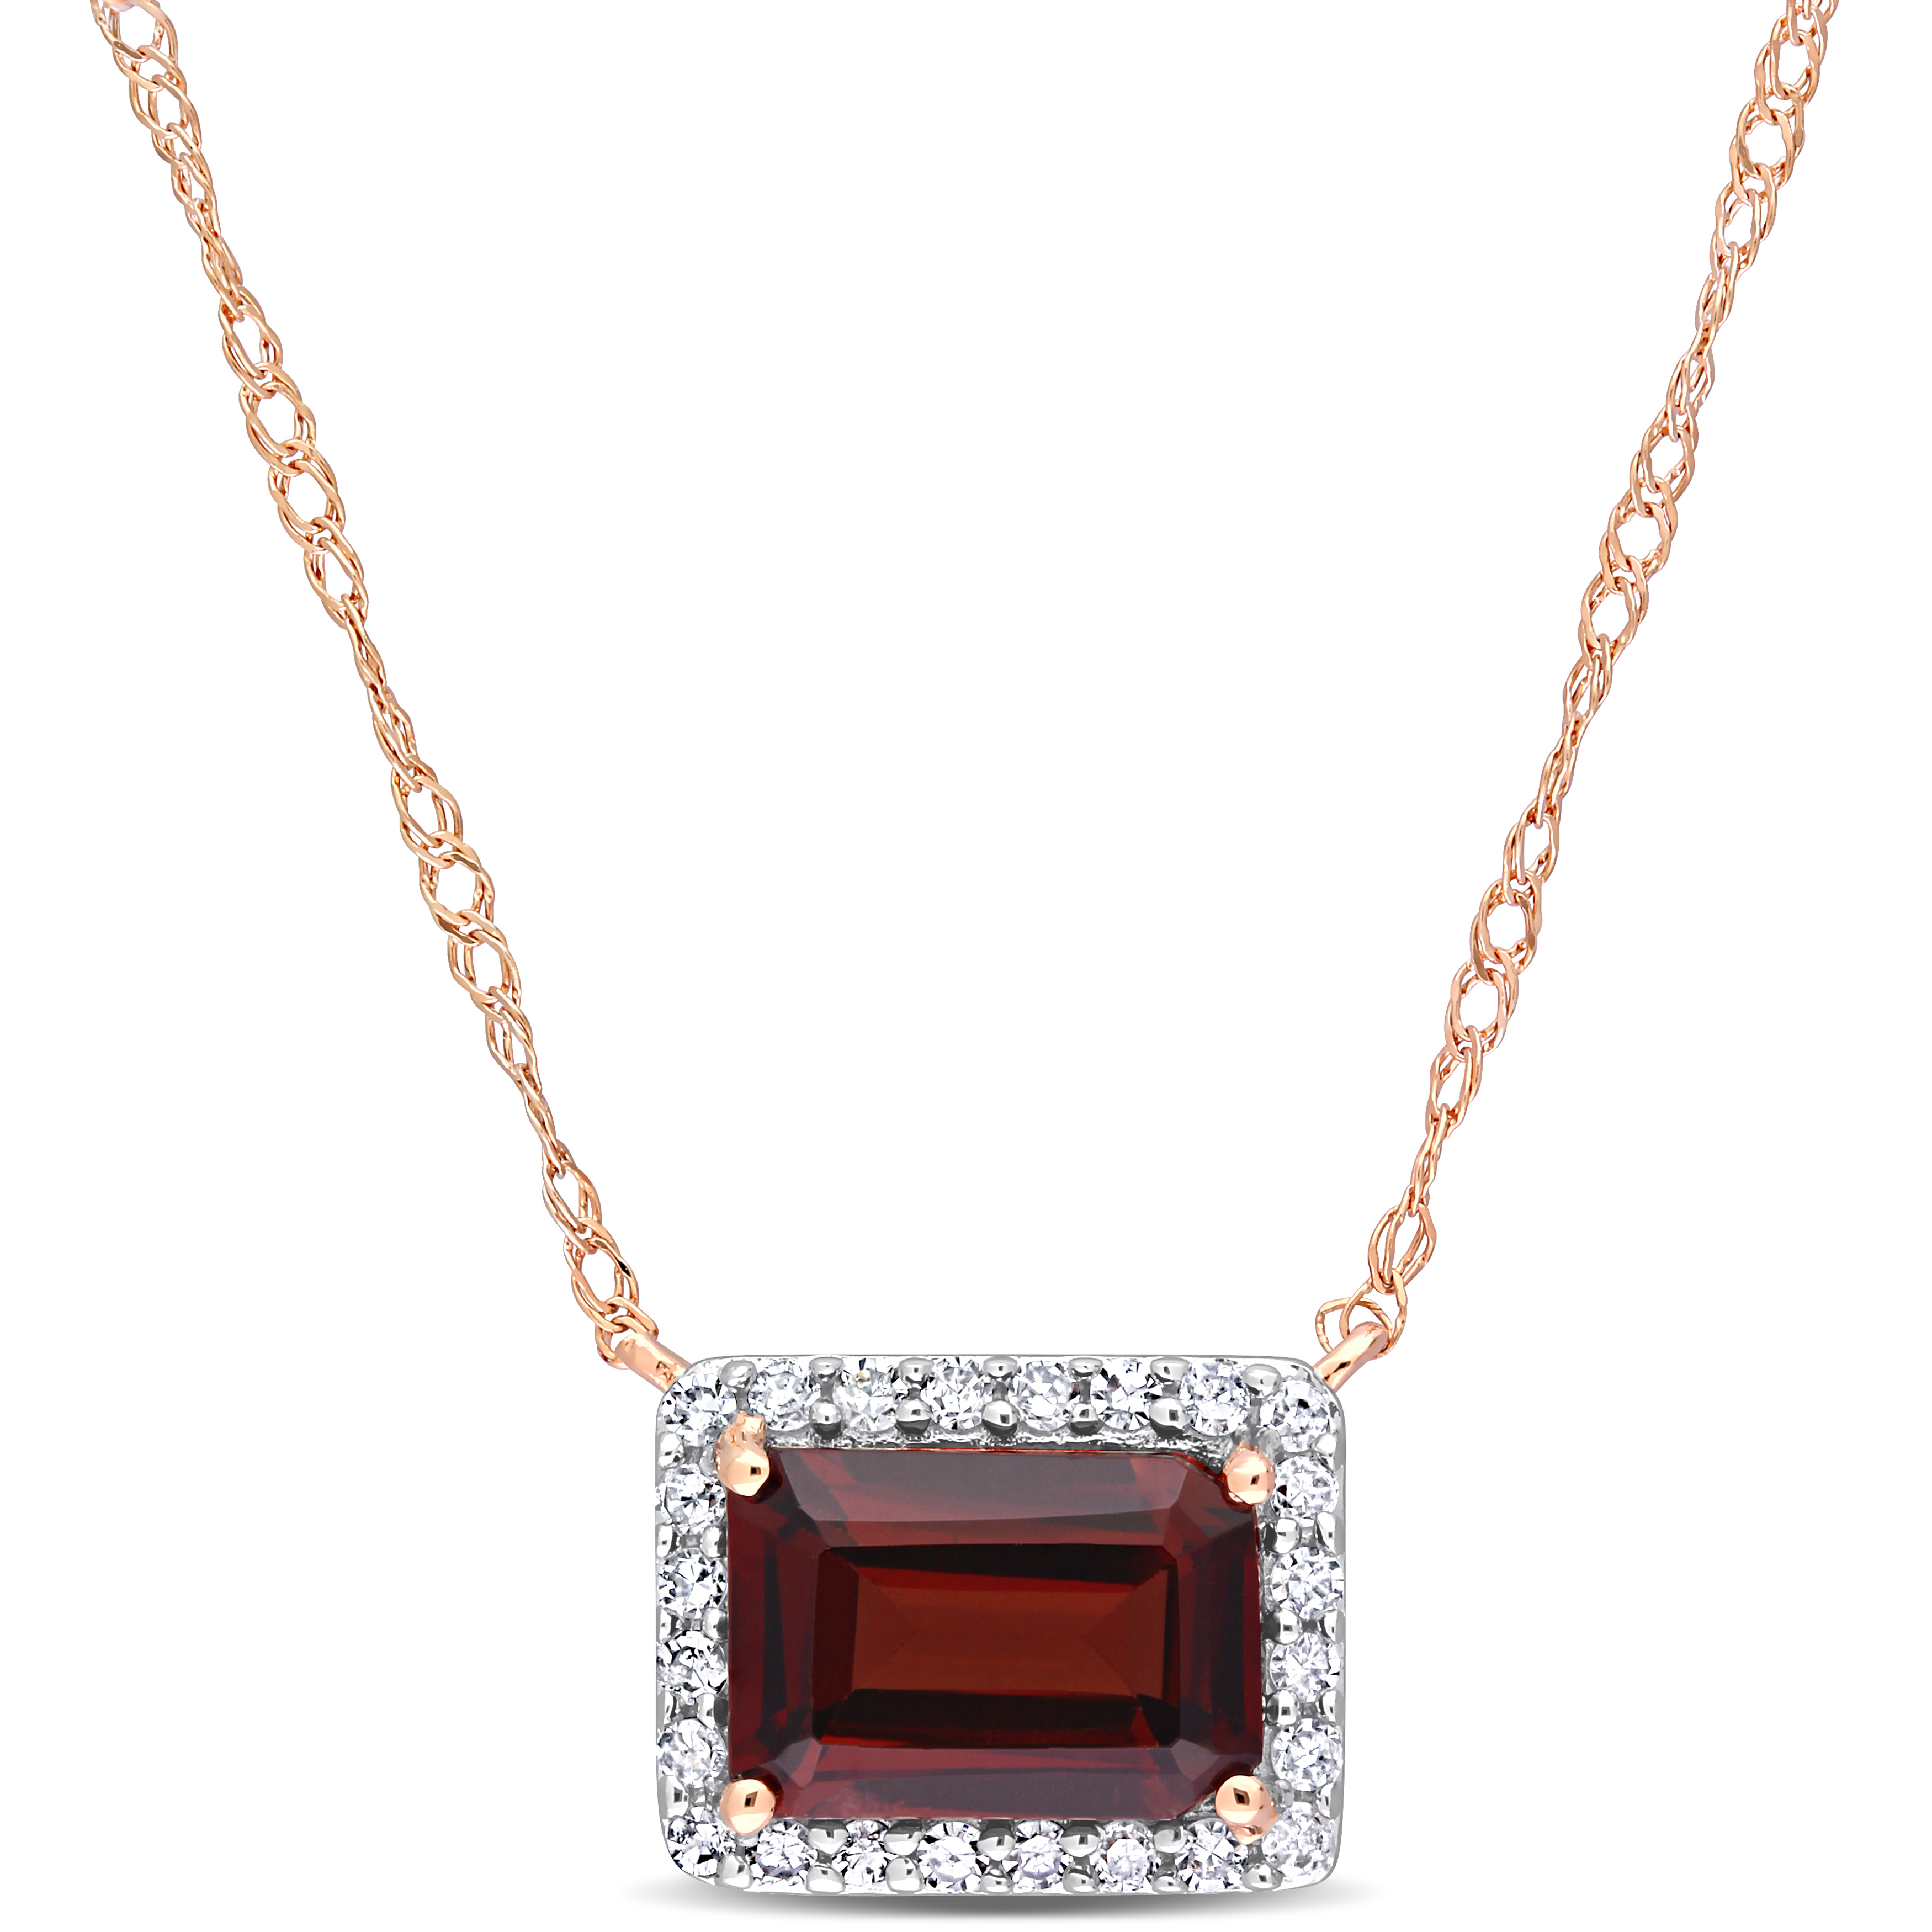 1 1/4 CT TGW Octagon Garnet and 1/8 CT TW Diamond Halo Necklace in 10k Rose Gold - 17 in.